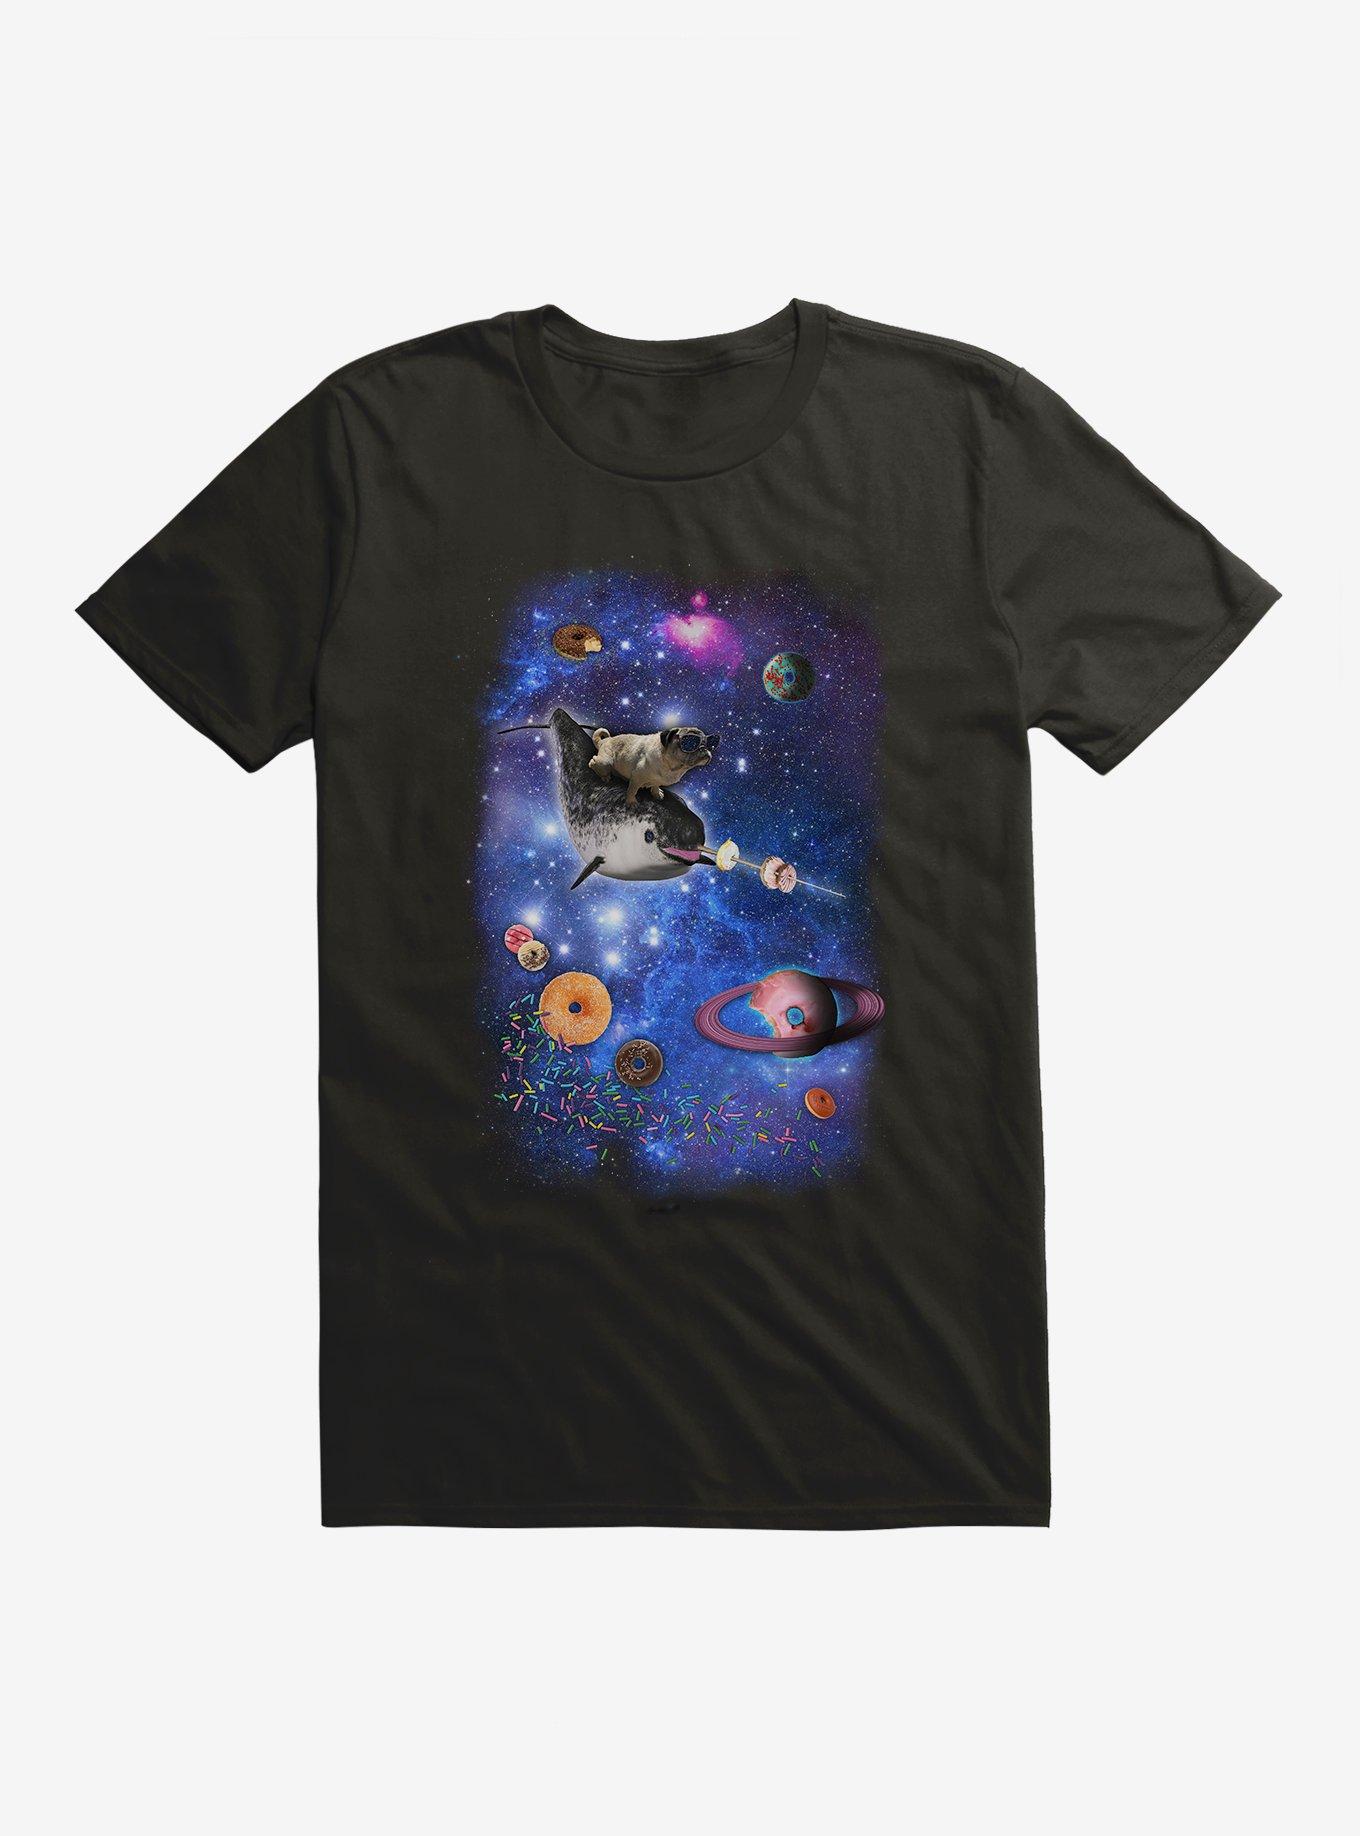 Pug and Narwhal in Space T-Shirt, , hi-res